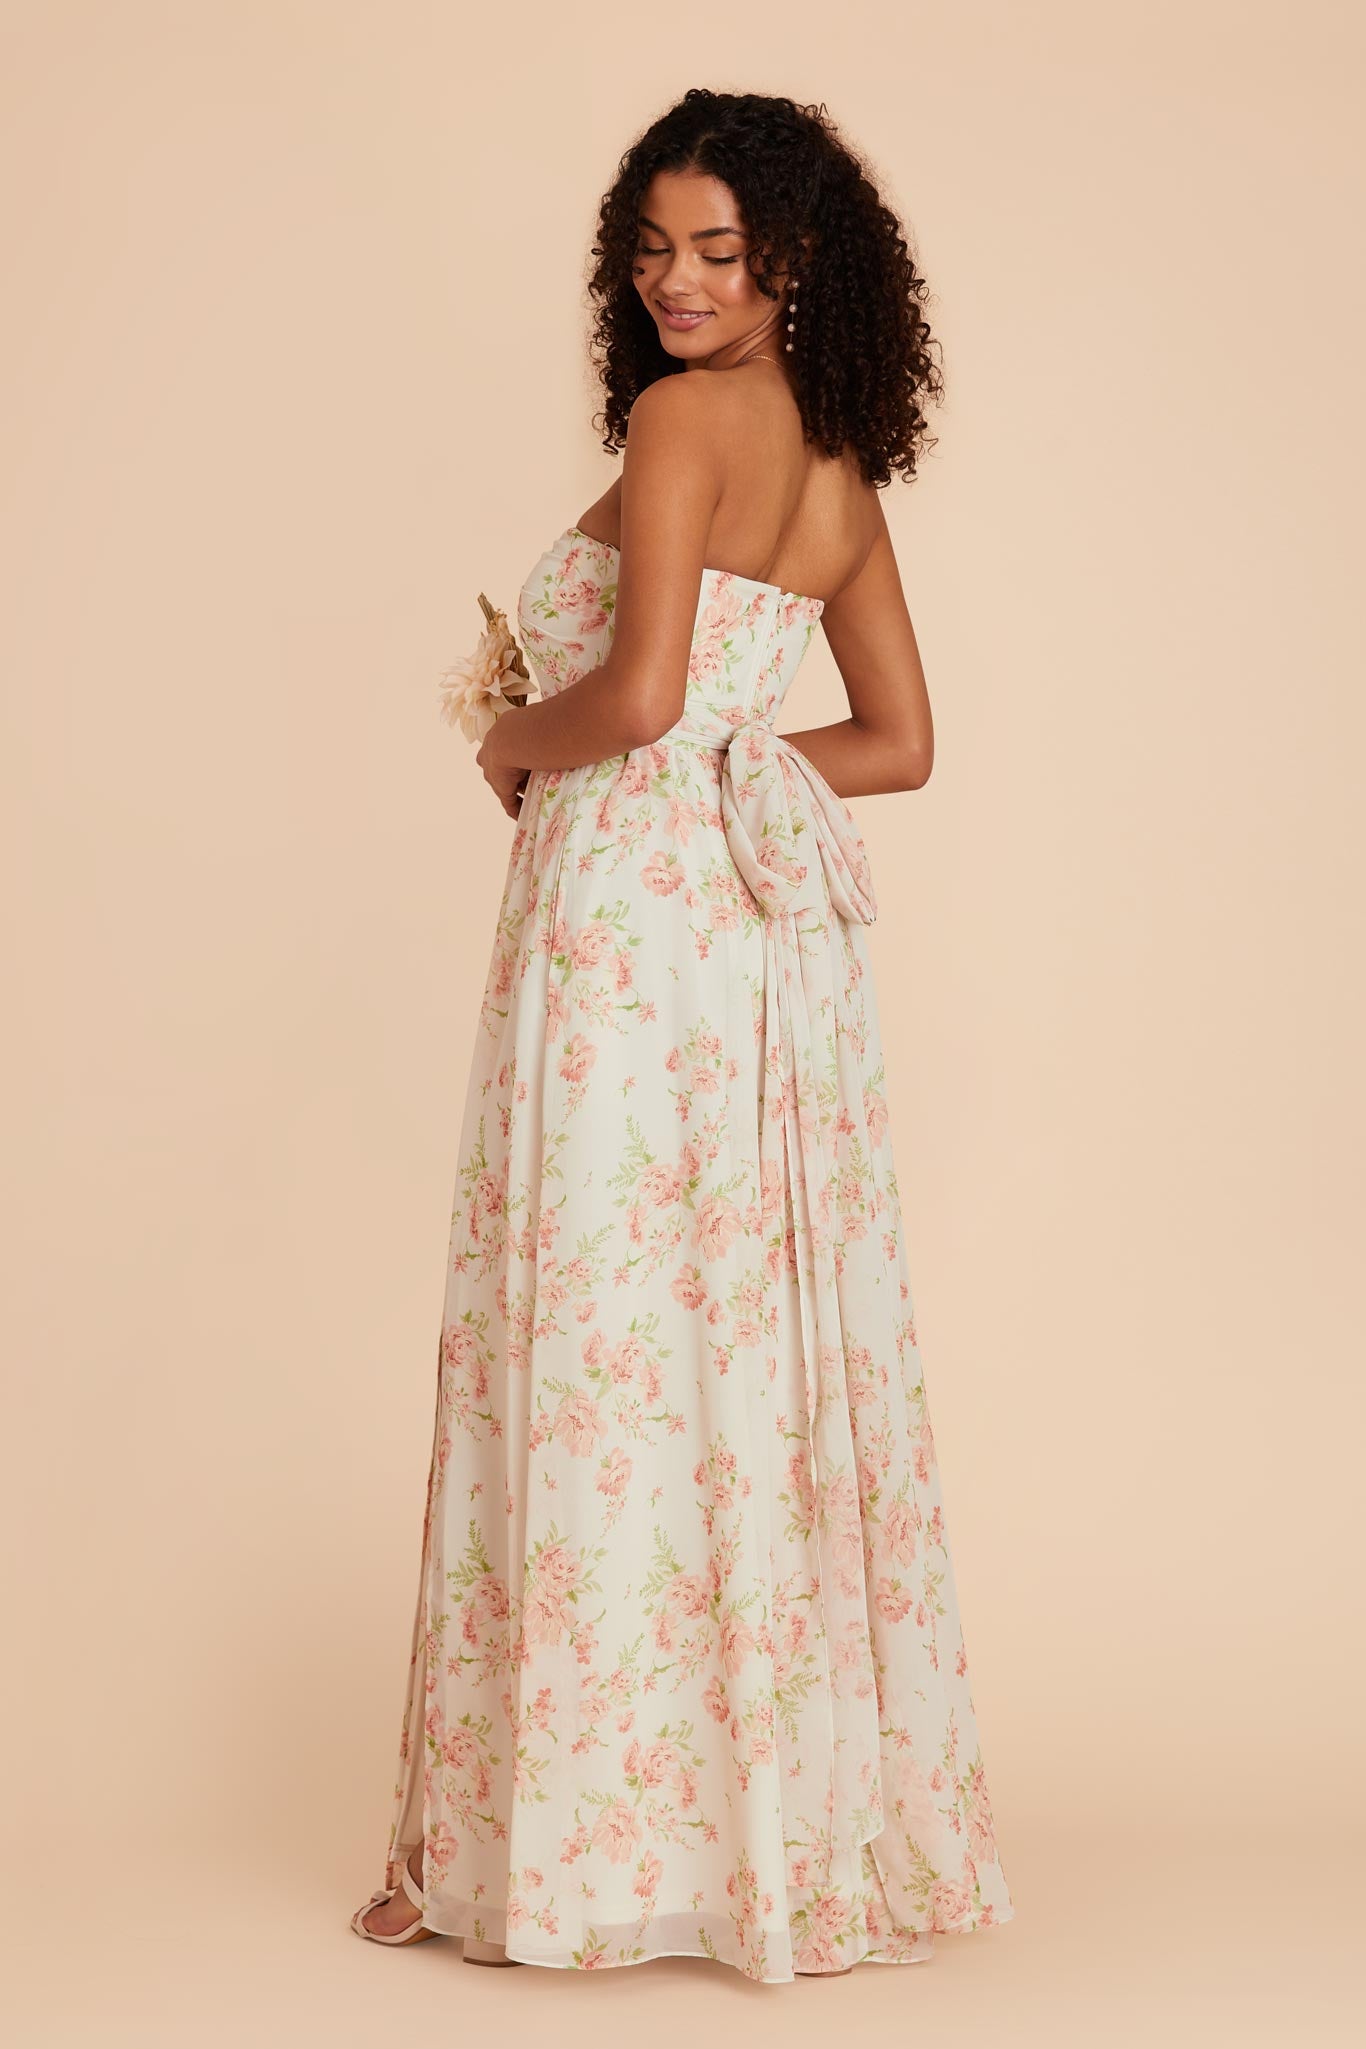 Grace Convertible Dress - Whimsical Blooms